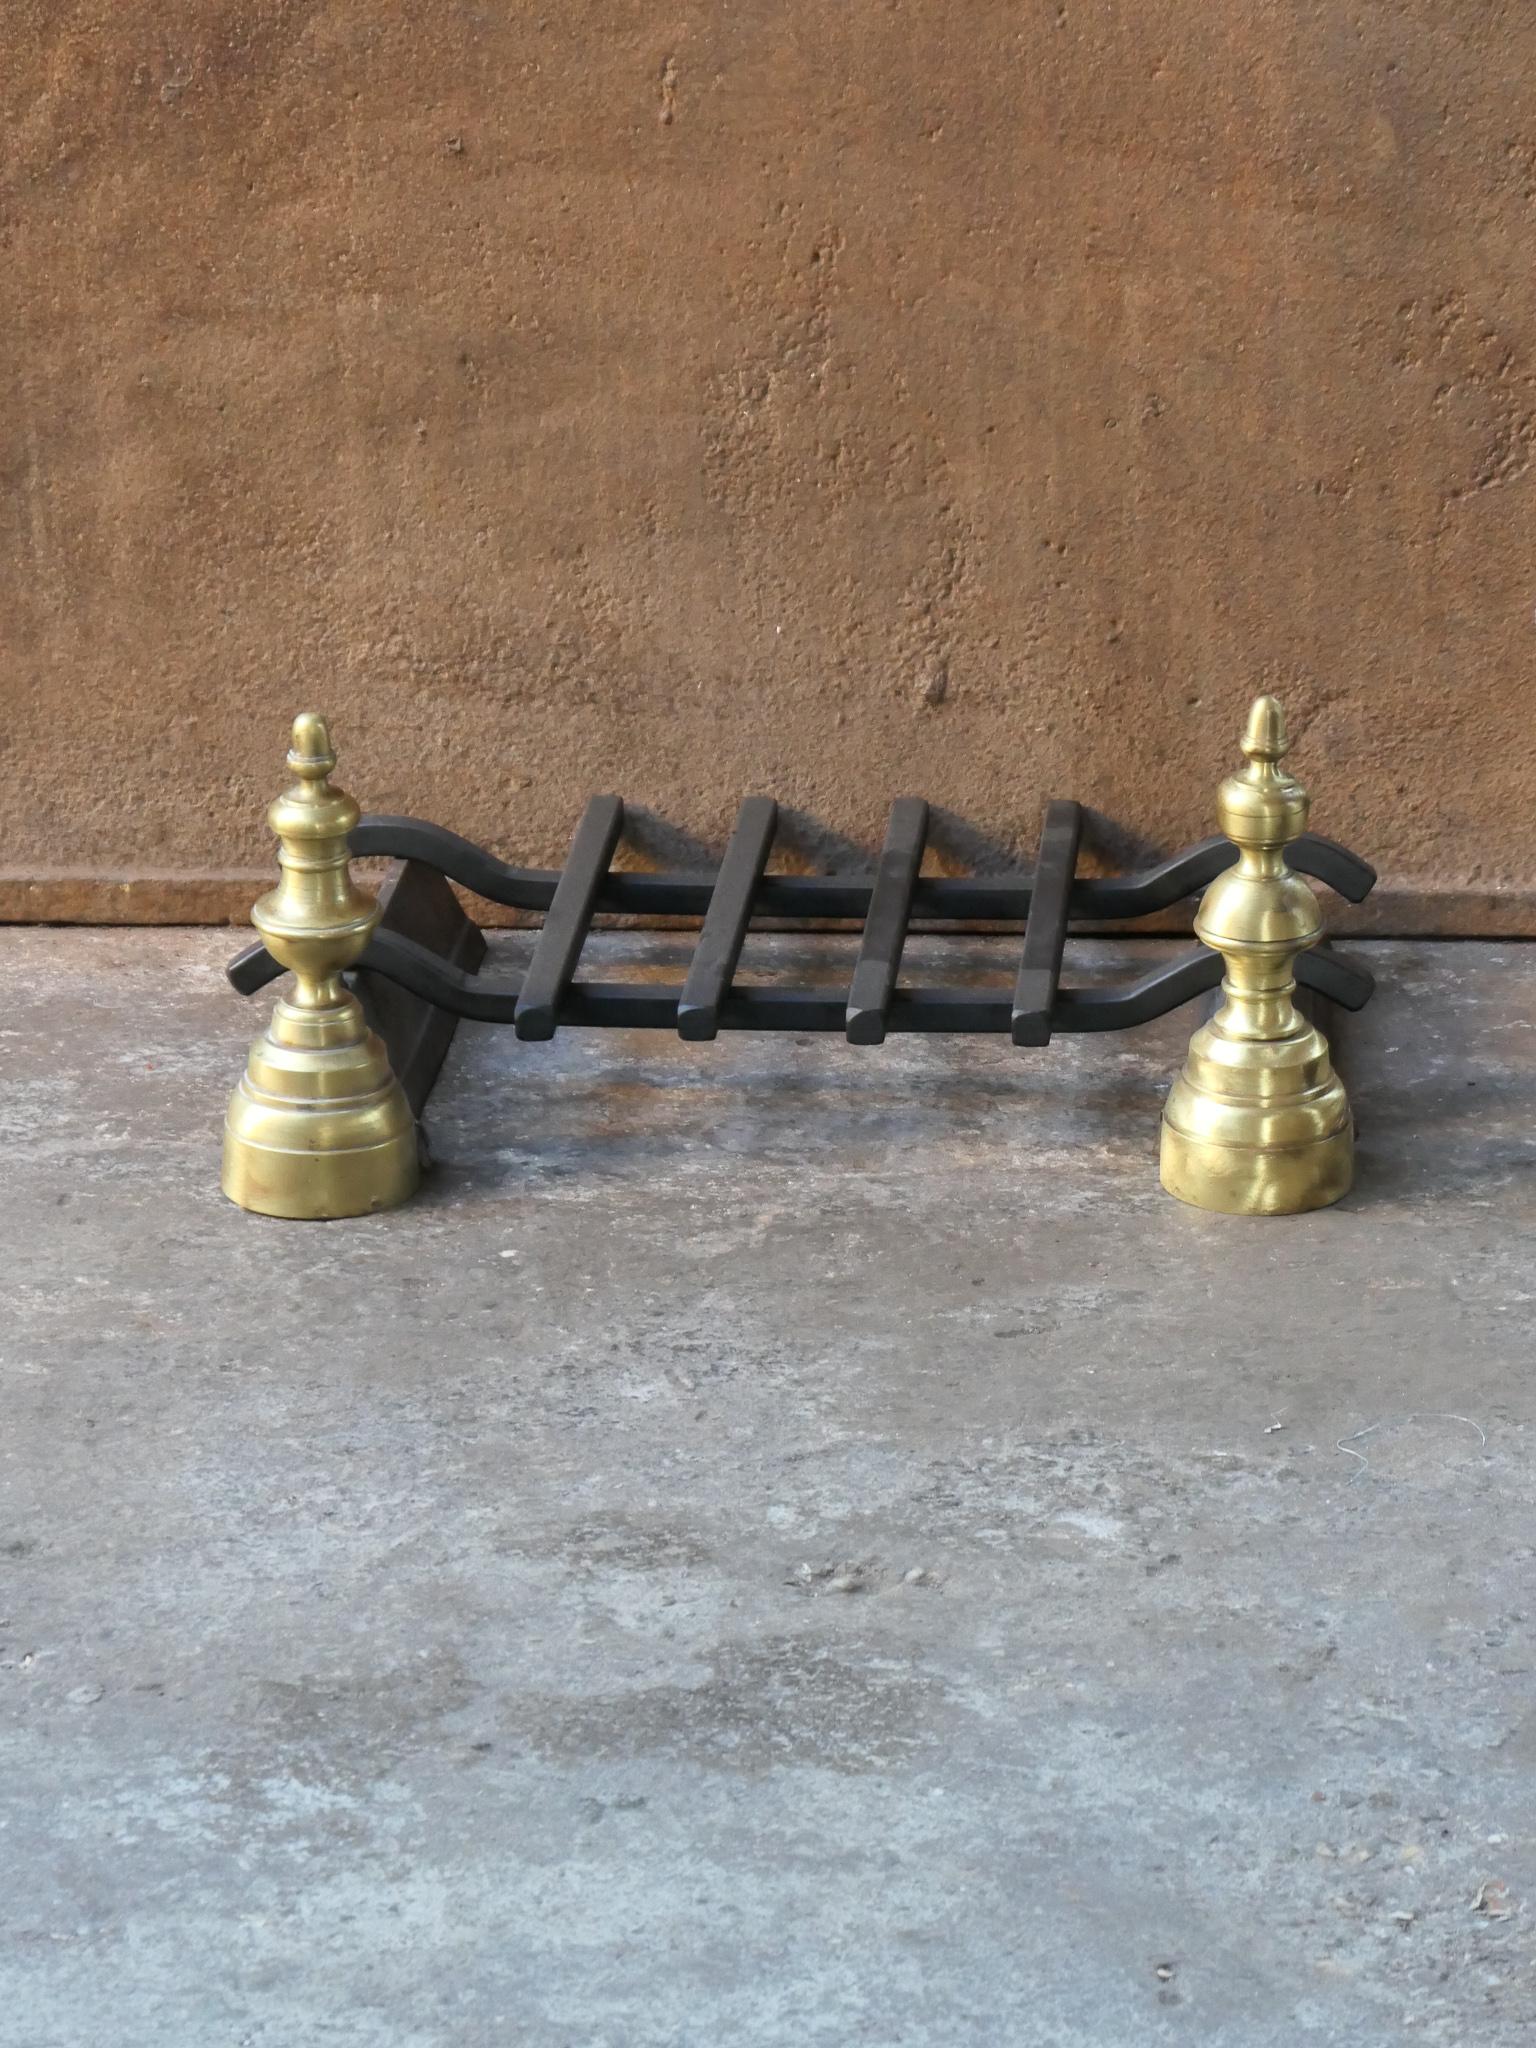 Late 19th or early 20th century French Napoleon III period fireplace basket with period andirons and new grate. The fire basket is made of wrought iron and brass. The basket is in a good condition and is fully functional.